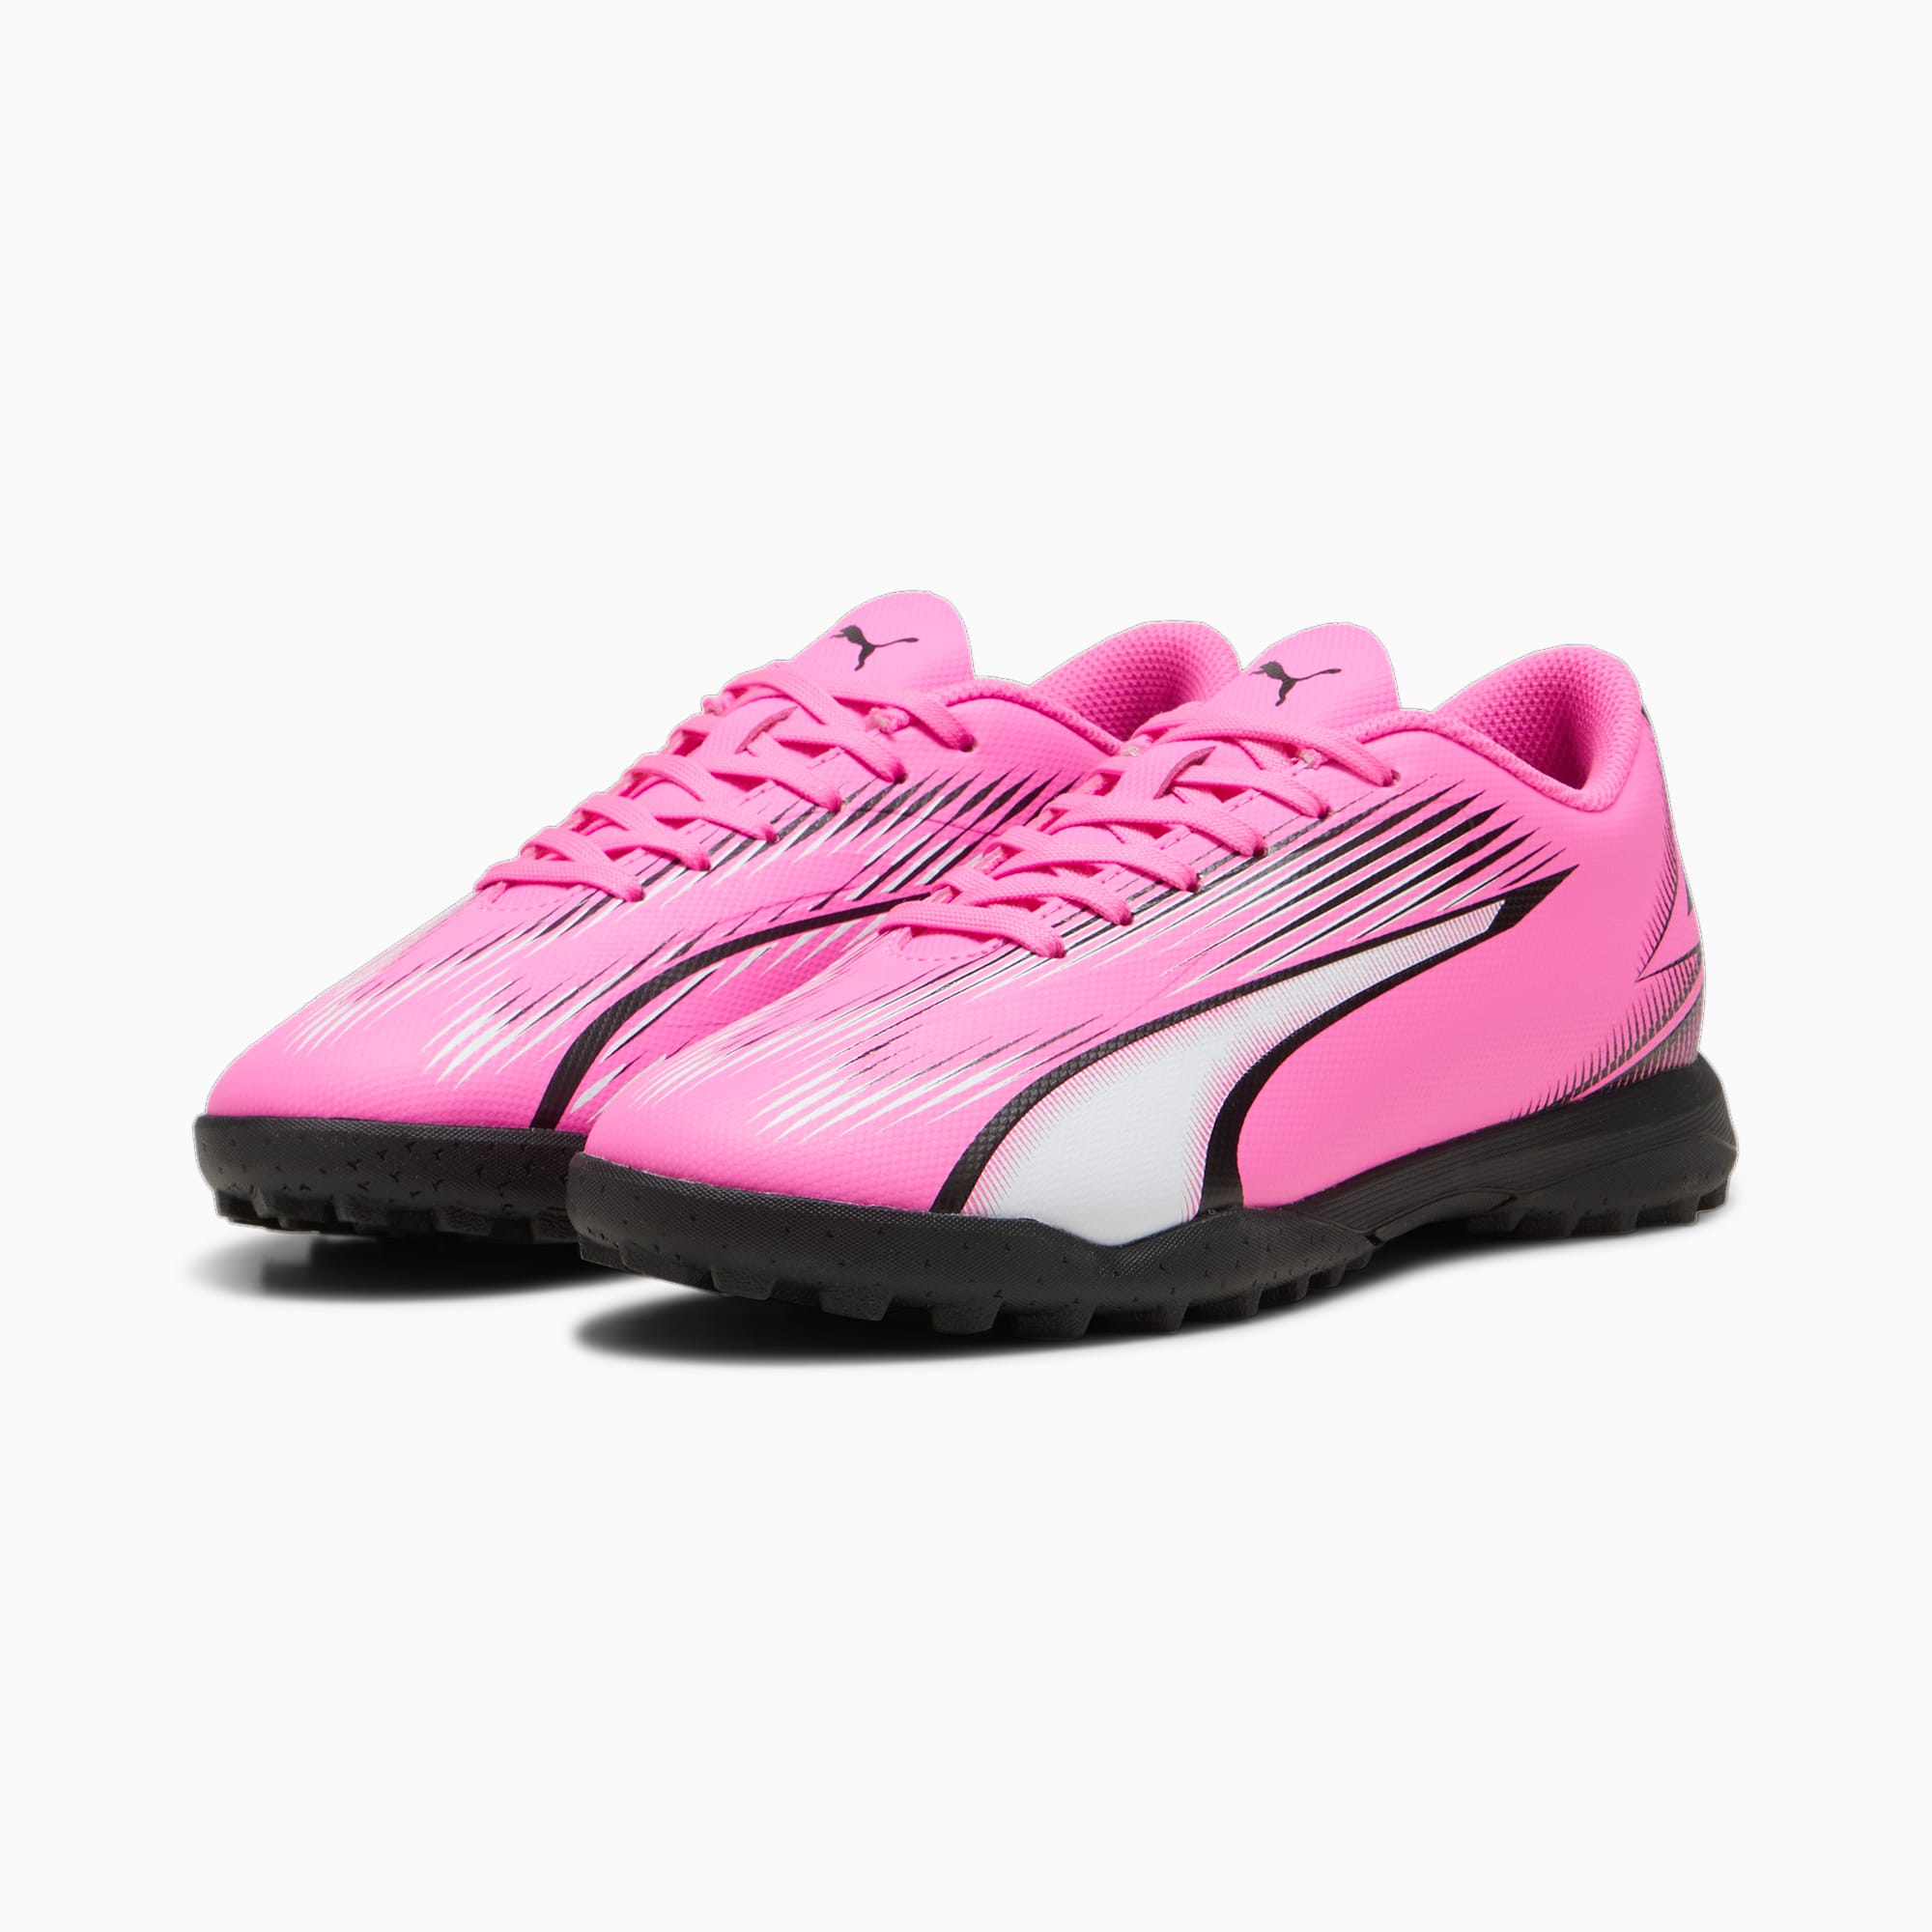 PUMA Ultra Play TT Youth Football Boots, Poison Pink/White/Black